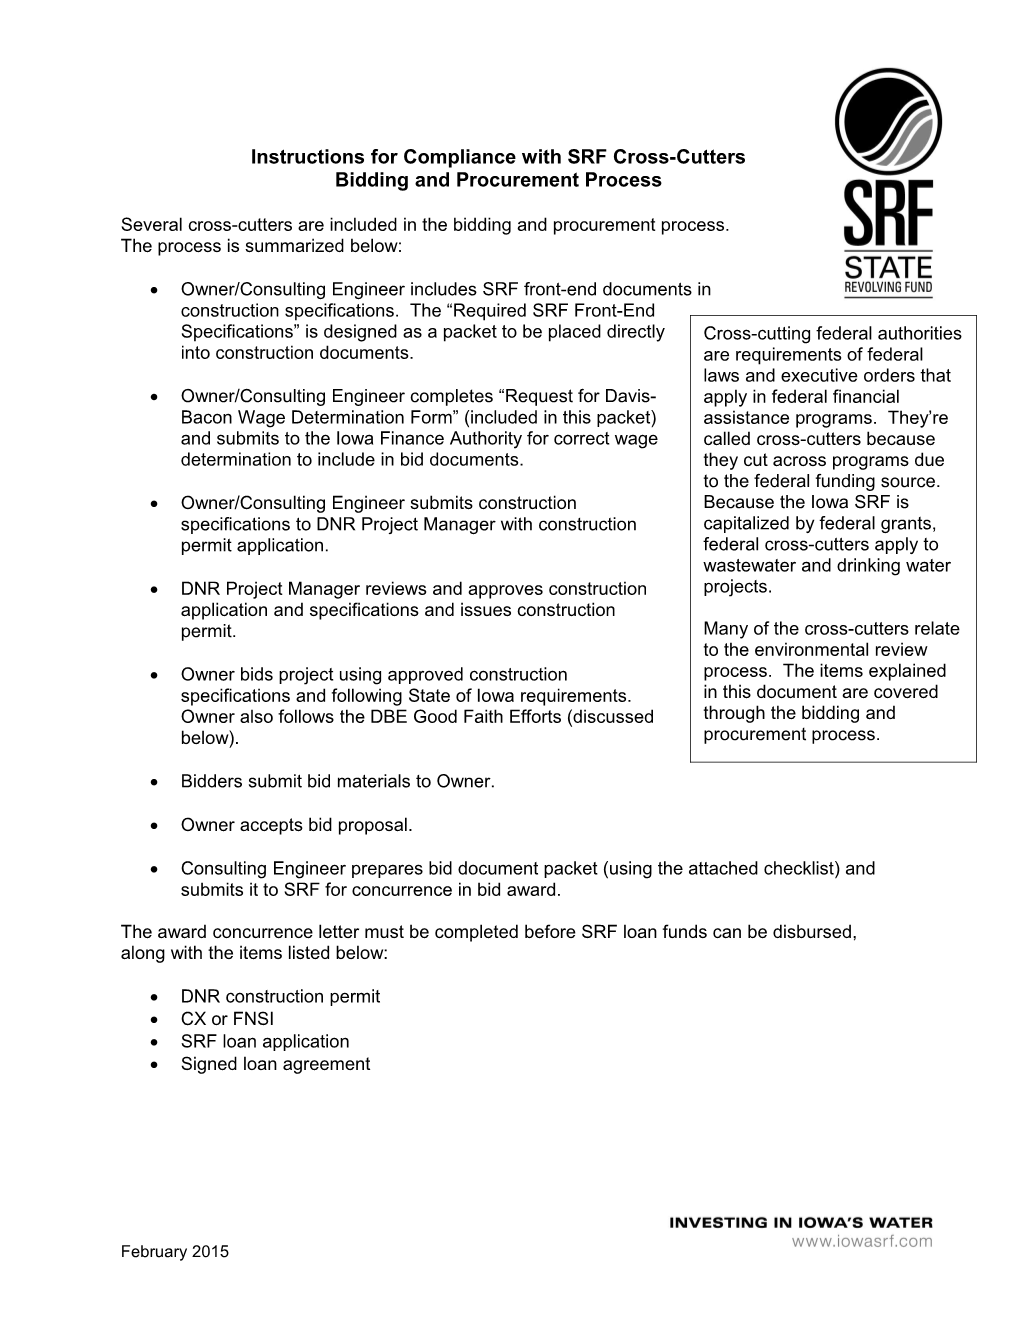 Instructions for Compliance with SRF Cross-Cutters